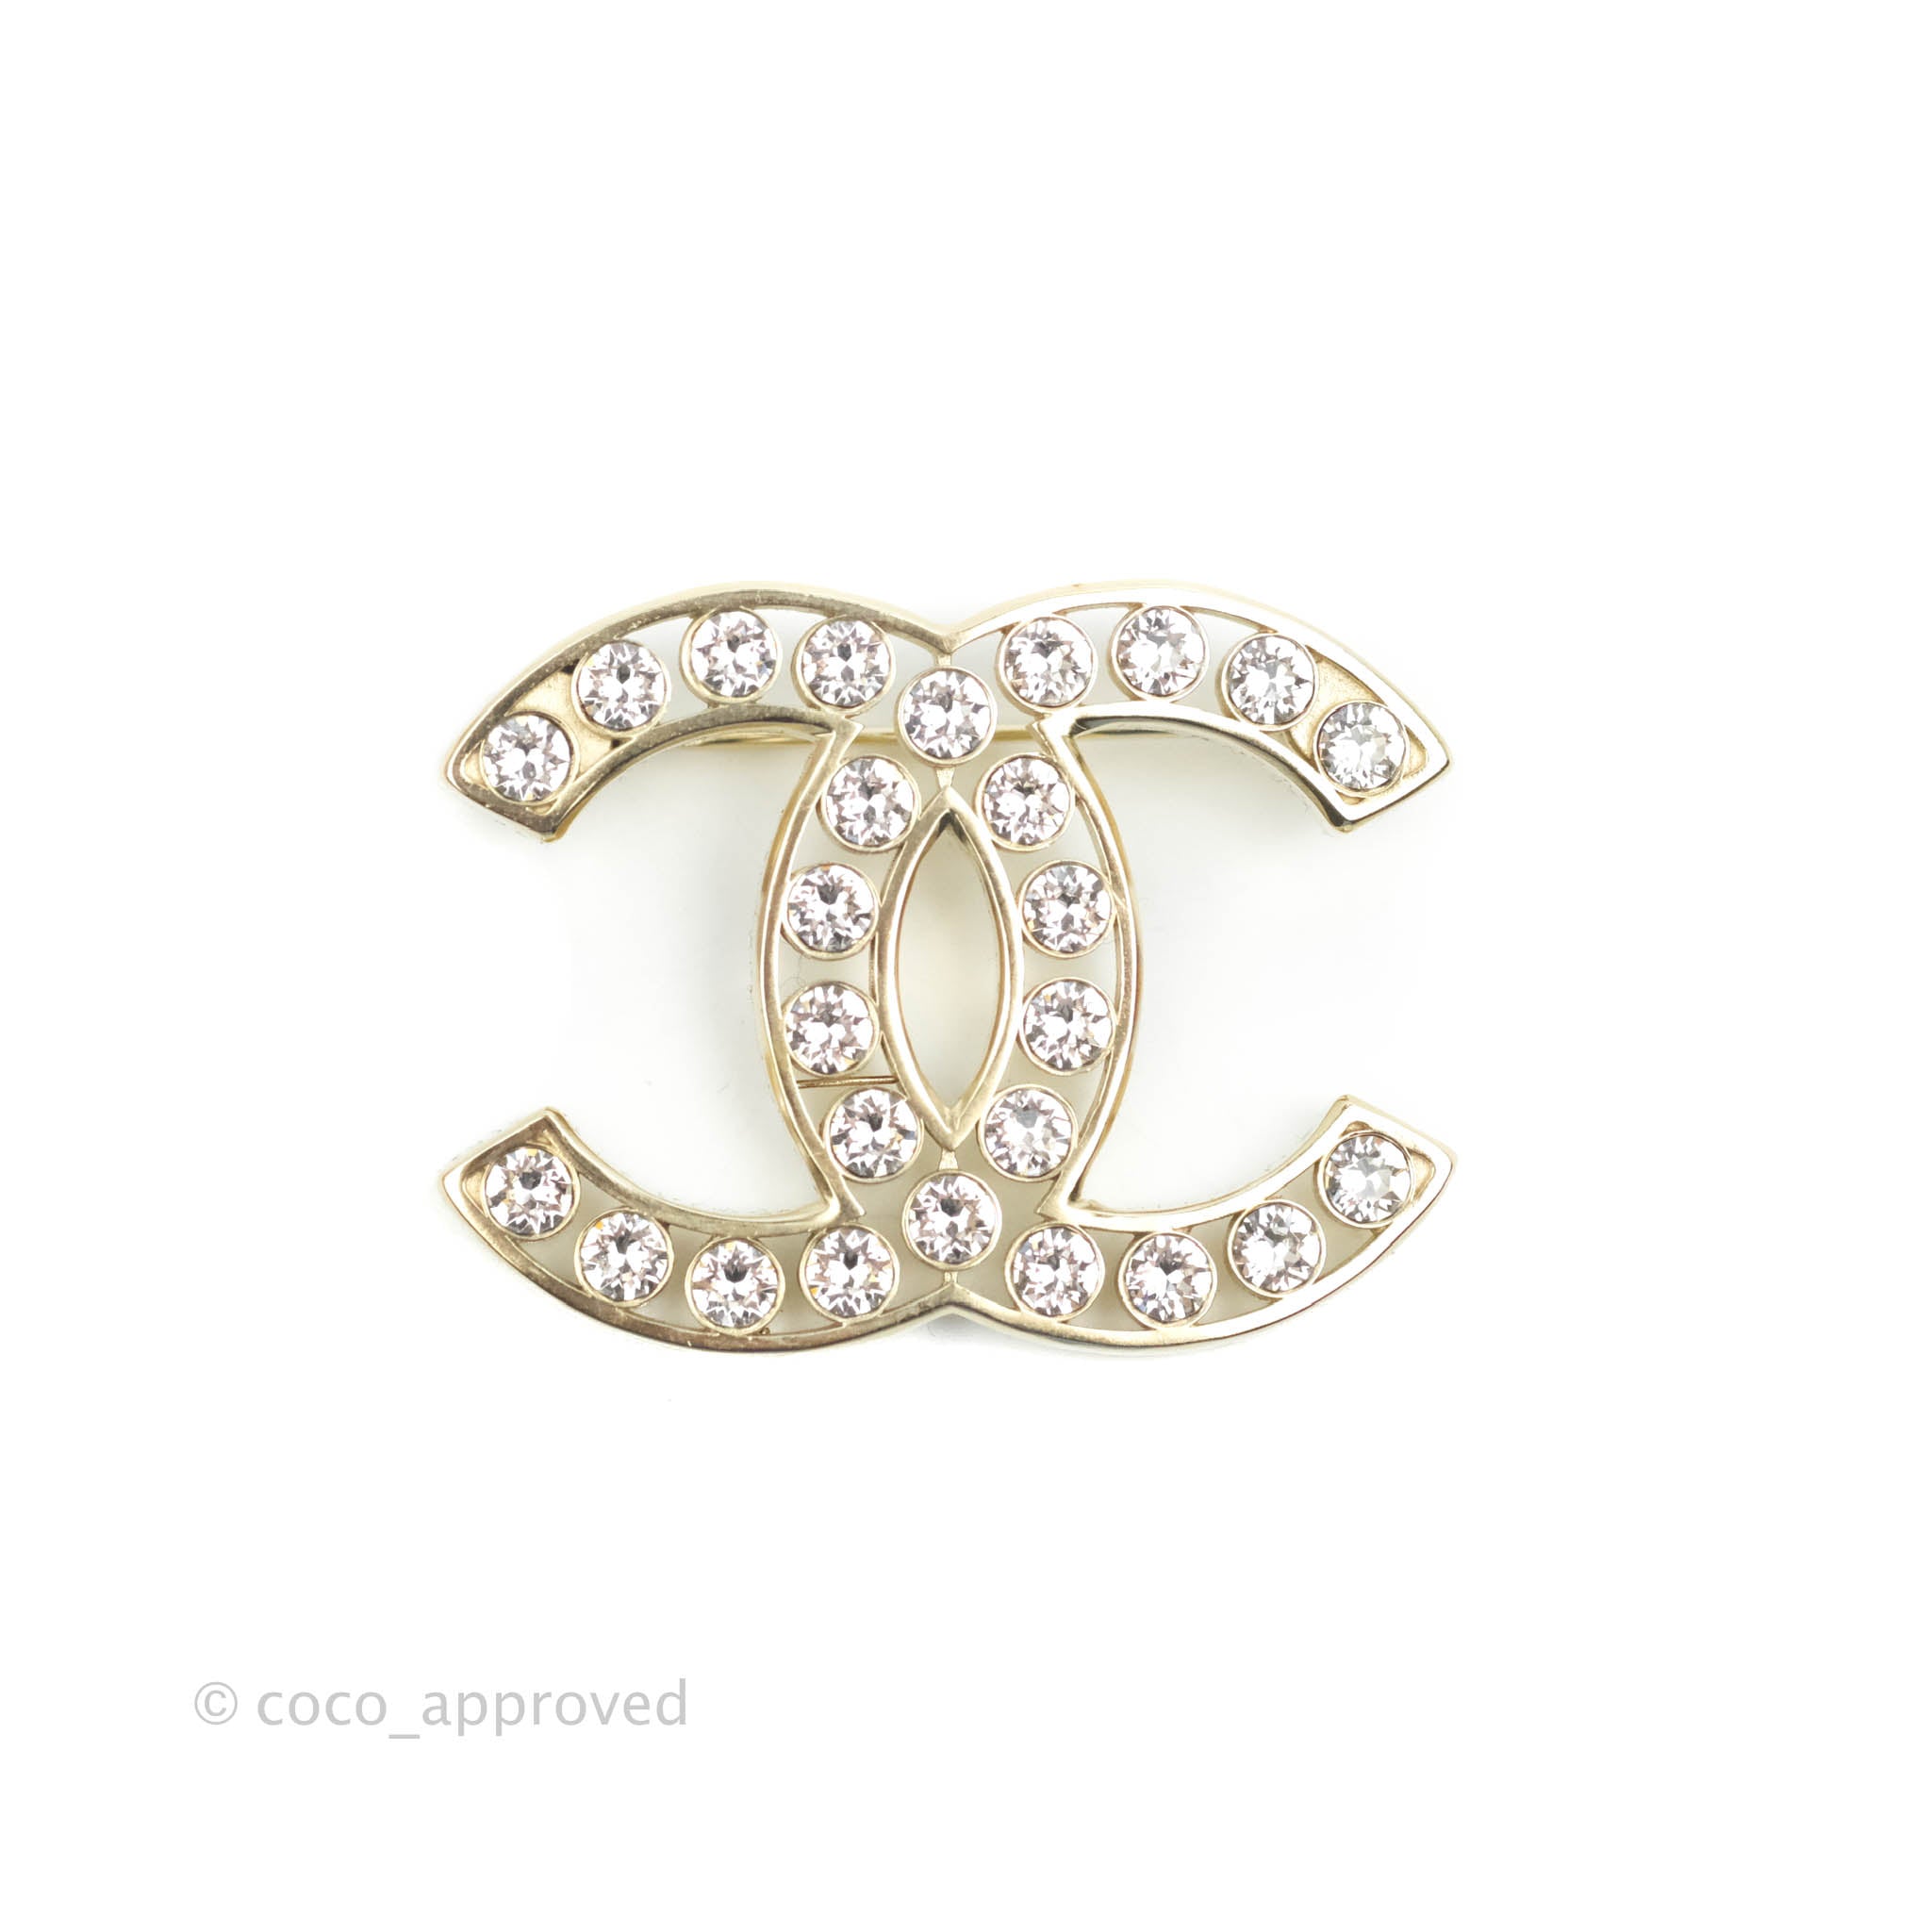 Gucci Crystal Bow Brooch | Foxy Couture Carmel